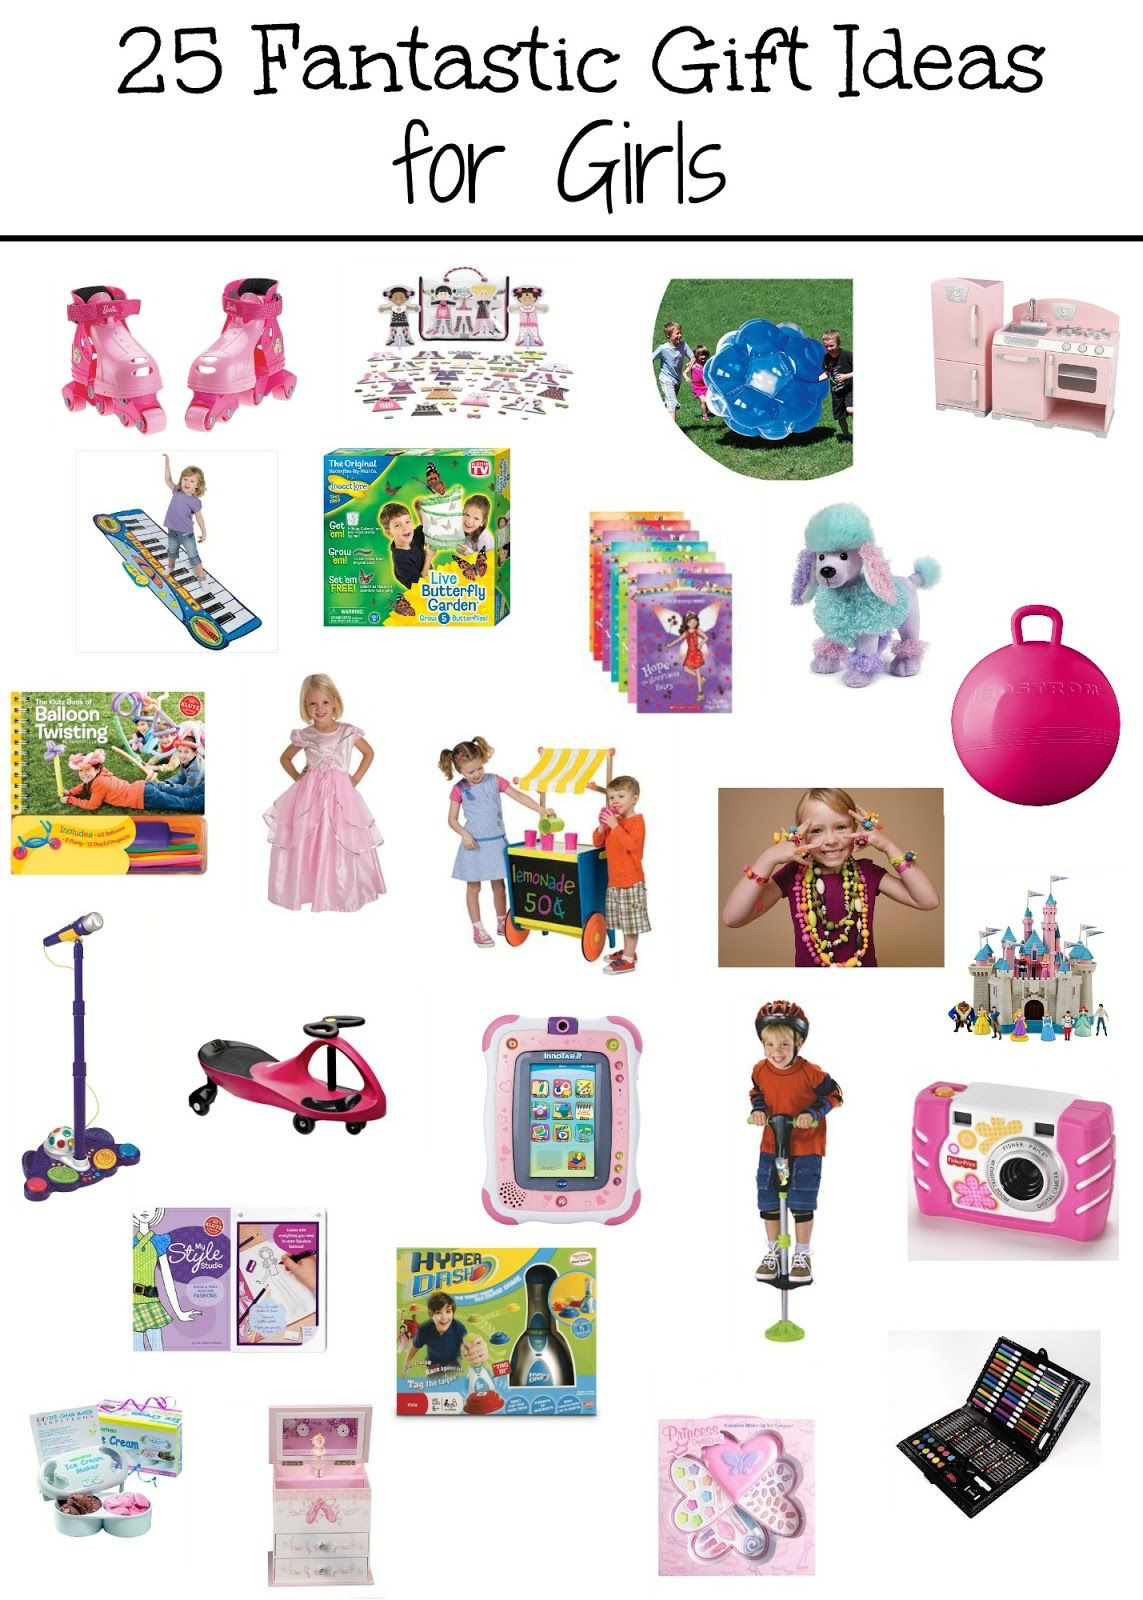 Cool Gifts For Kids 8 And Up
 25 Fantastic Gift Ideas for Girls Educational toys